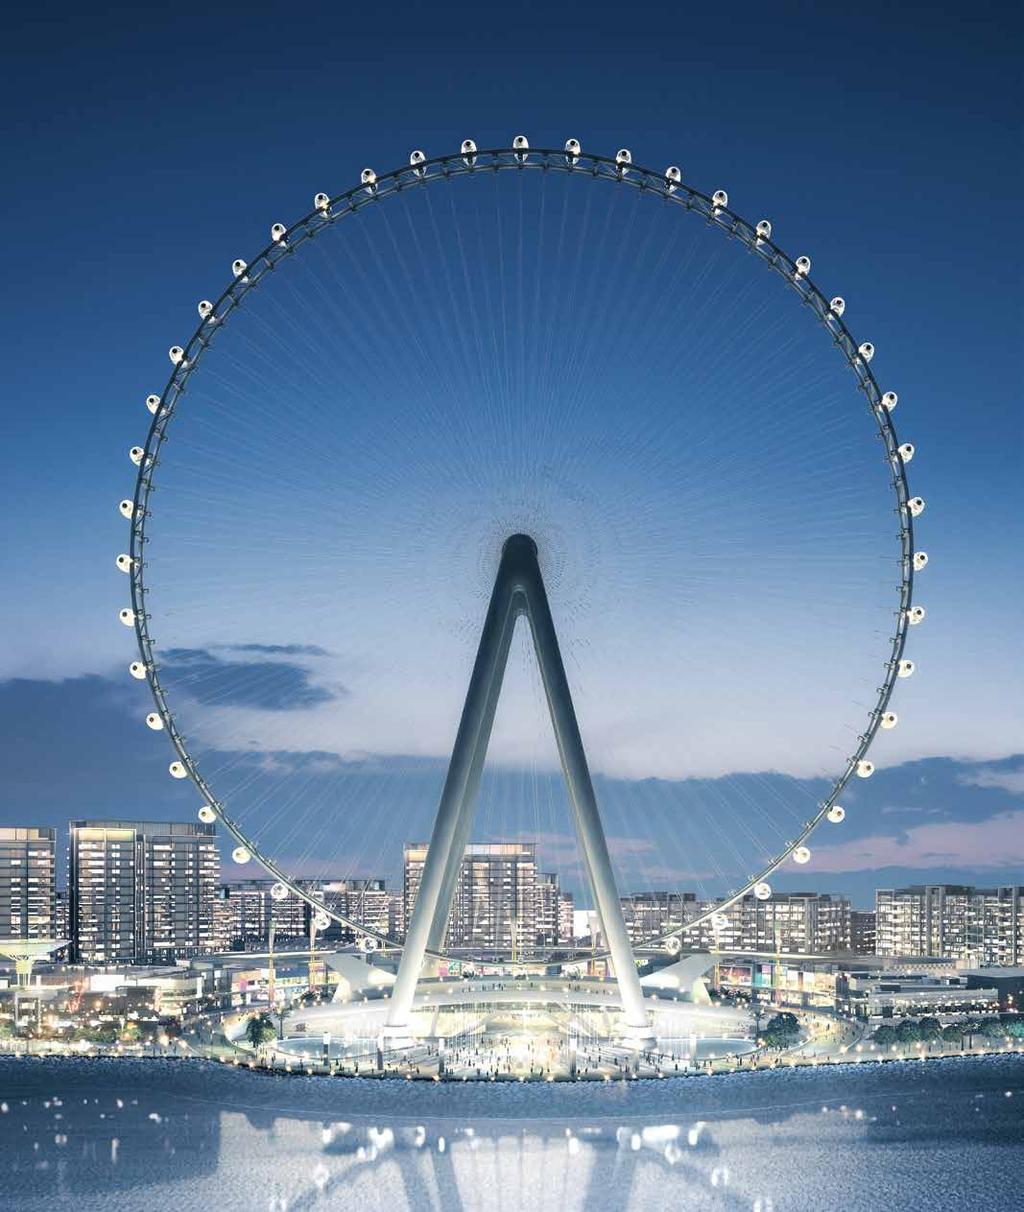 A world-class destination At 210m, Ain Dubai is the world s largest observation wheel and forms the spectacular centrepiece of Bluewaters.